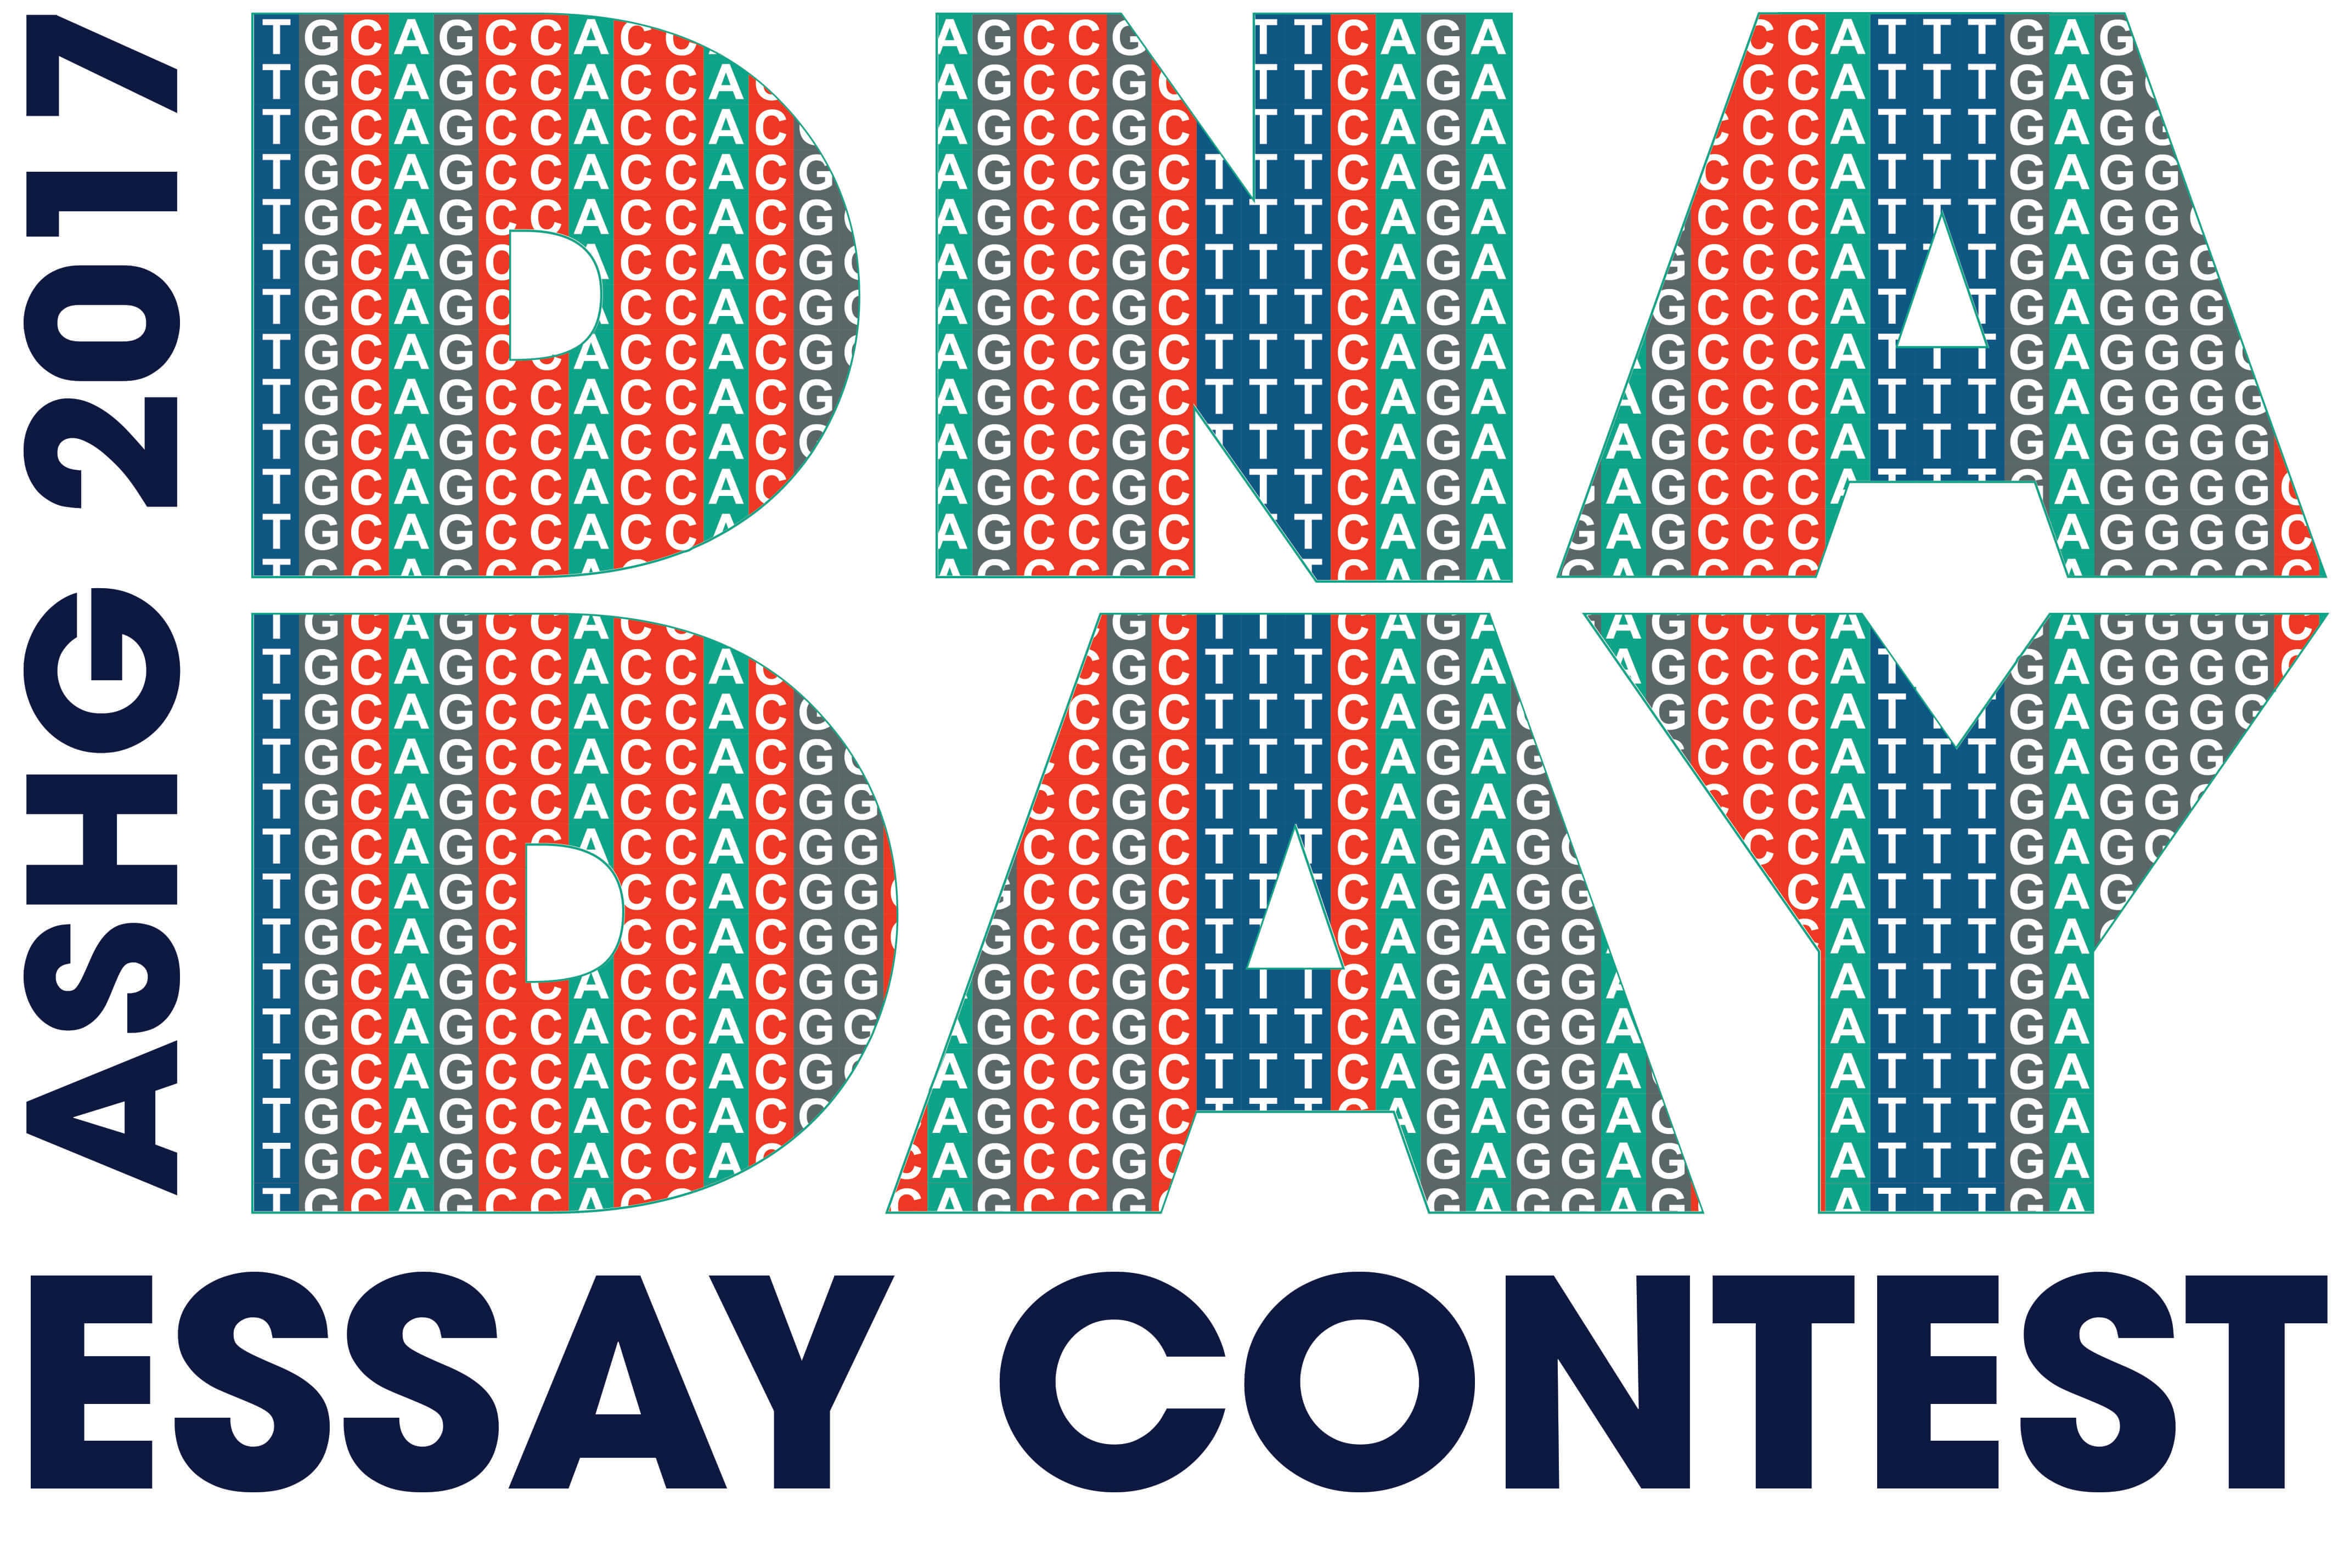 Dna day essay contest 2011